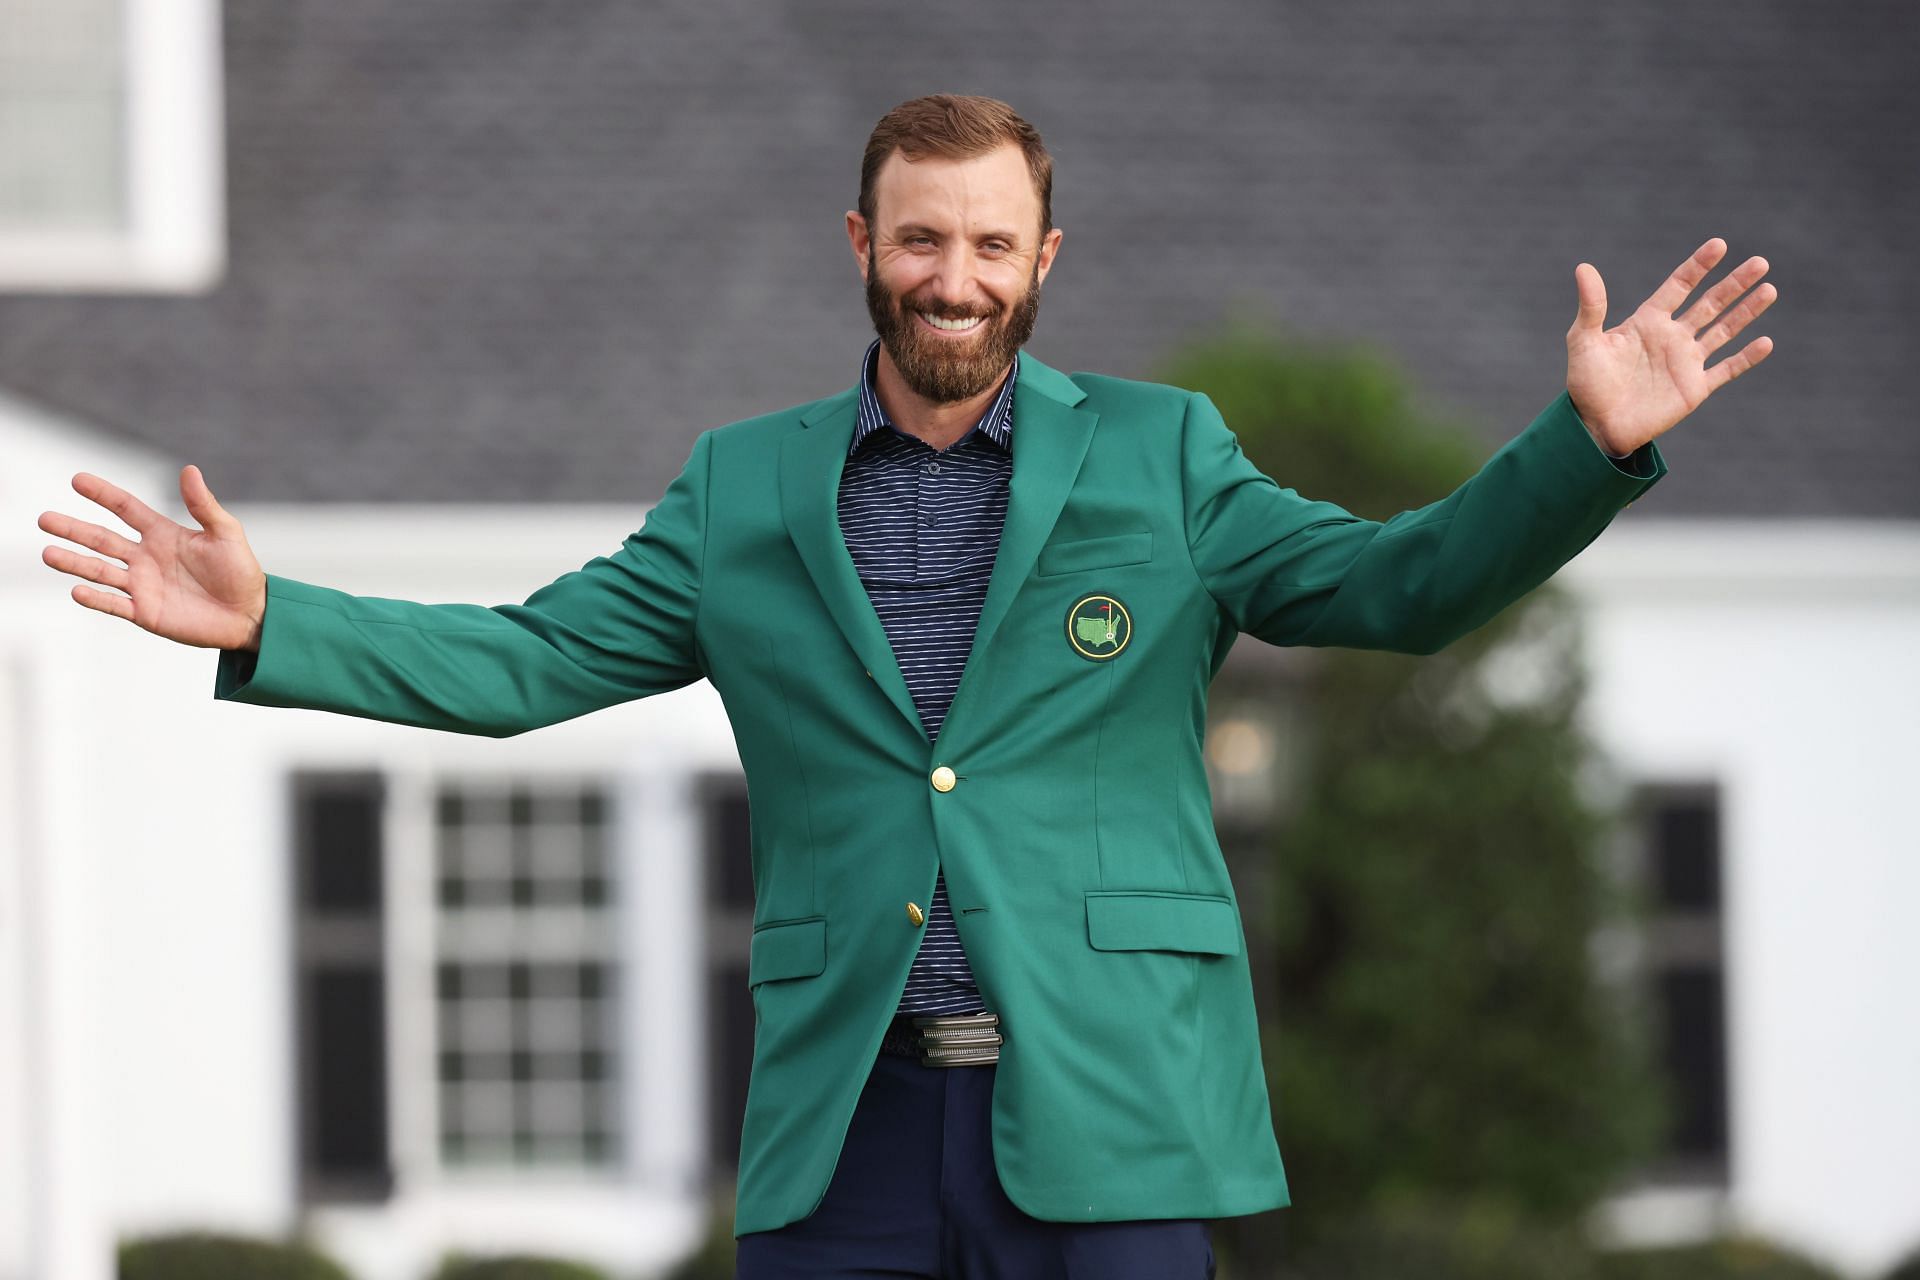 Dustin Johnson, now a LIV Golf member, won the 2020 Masters